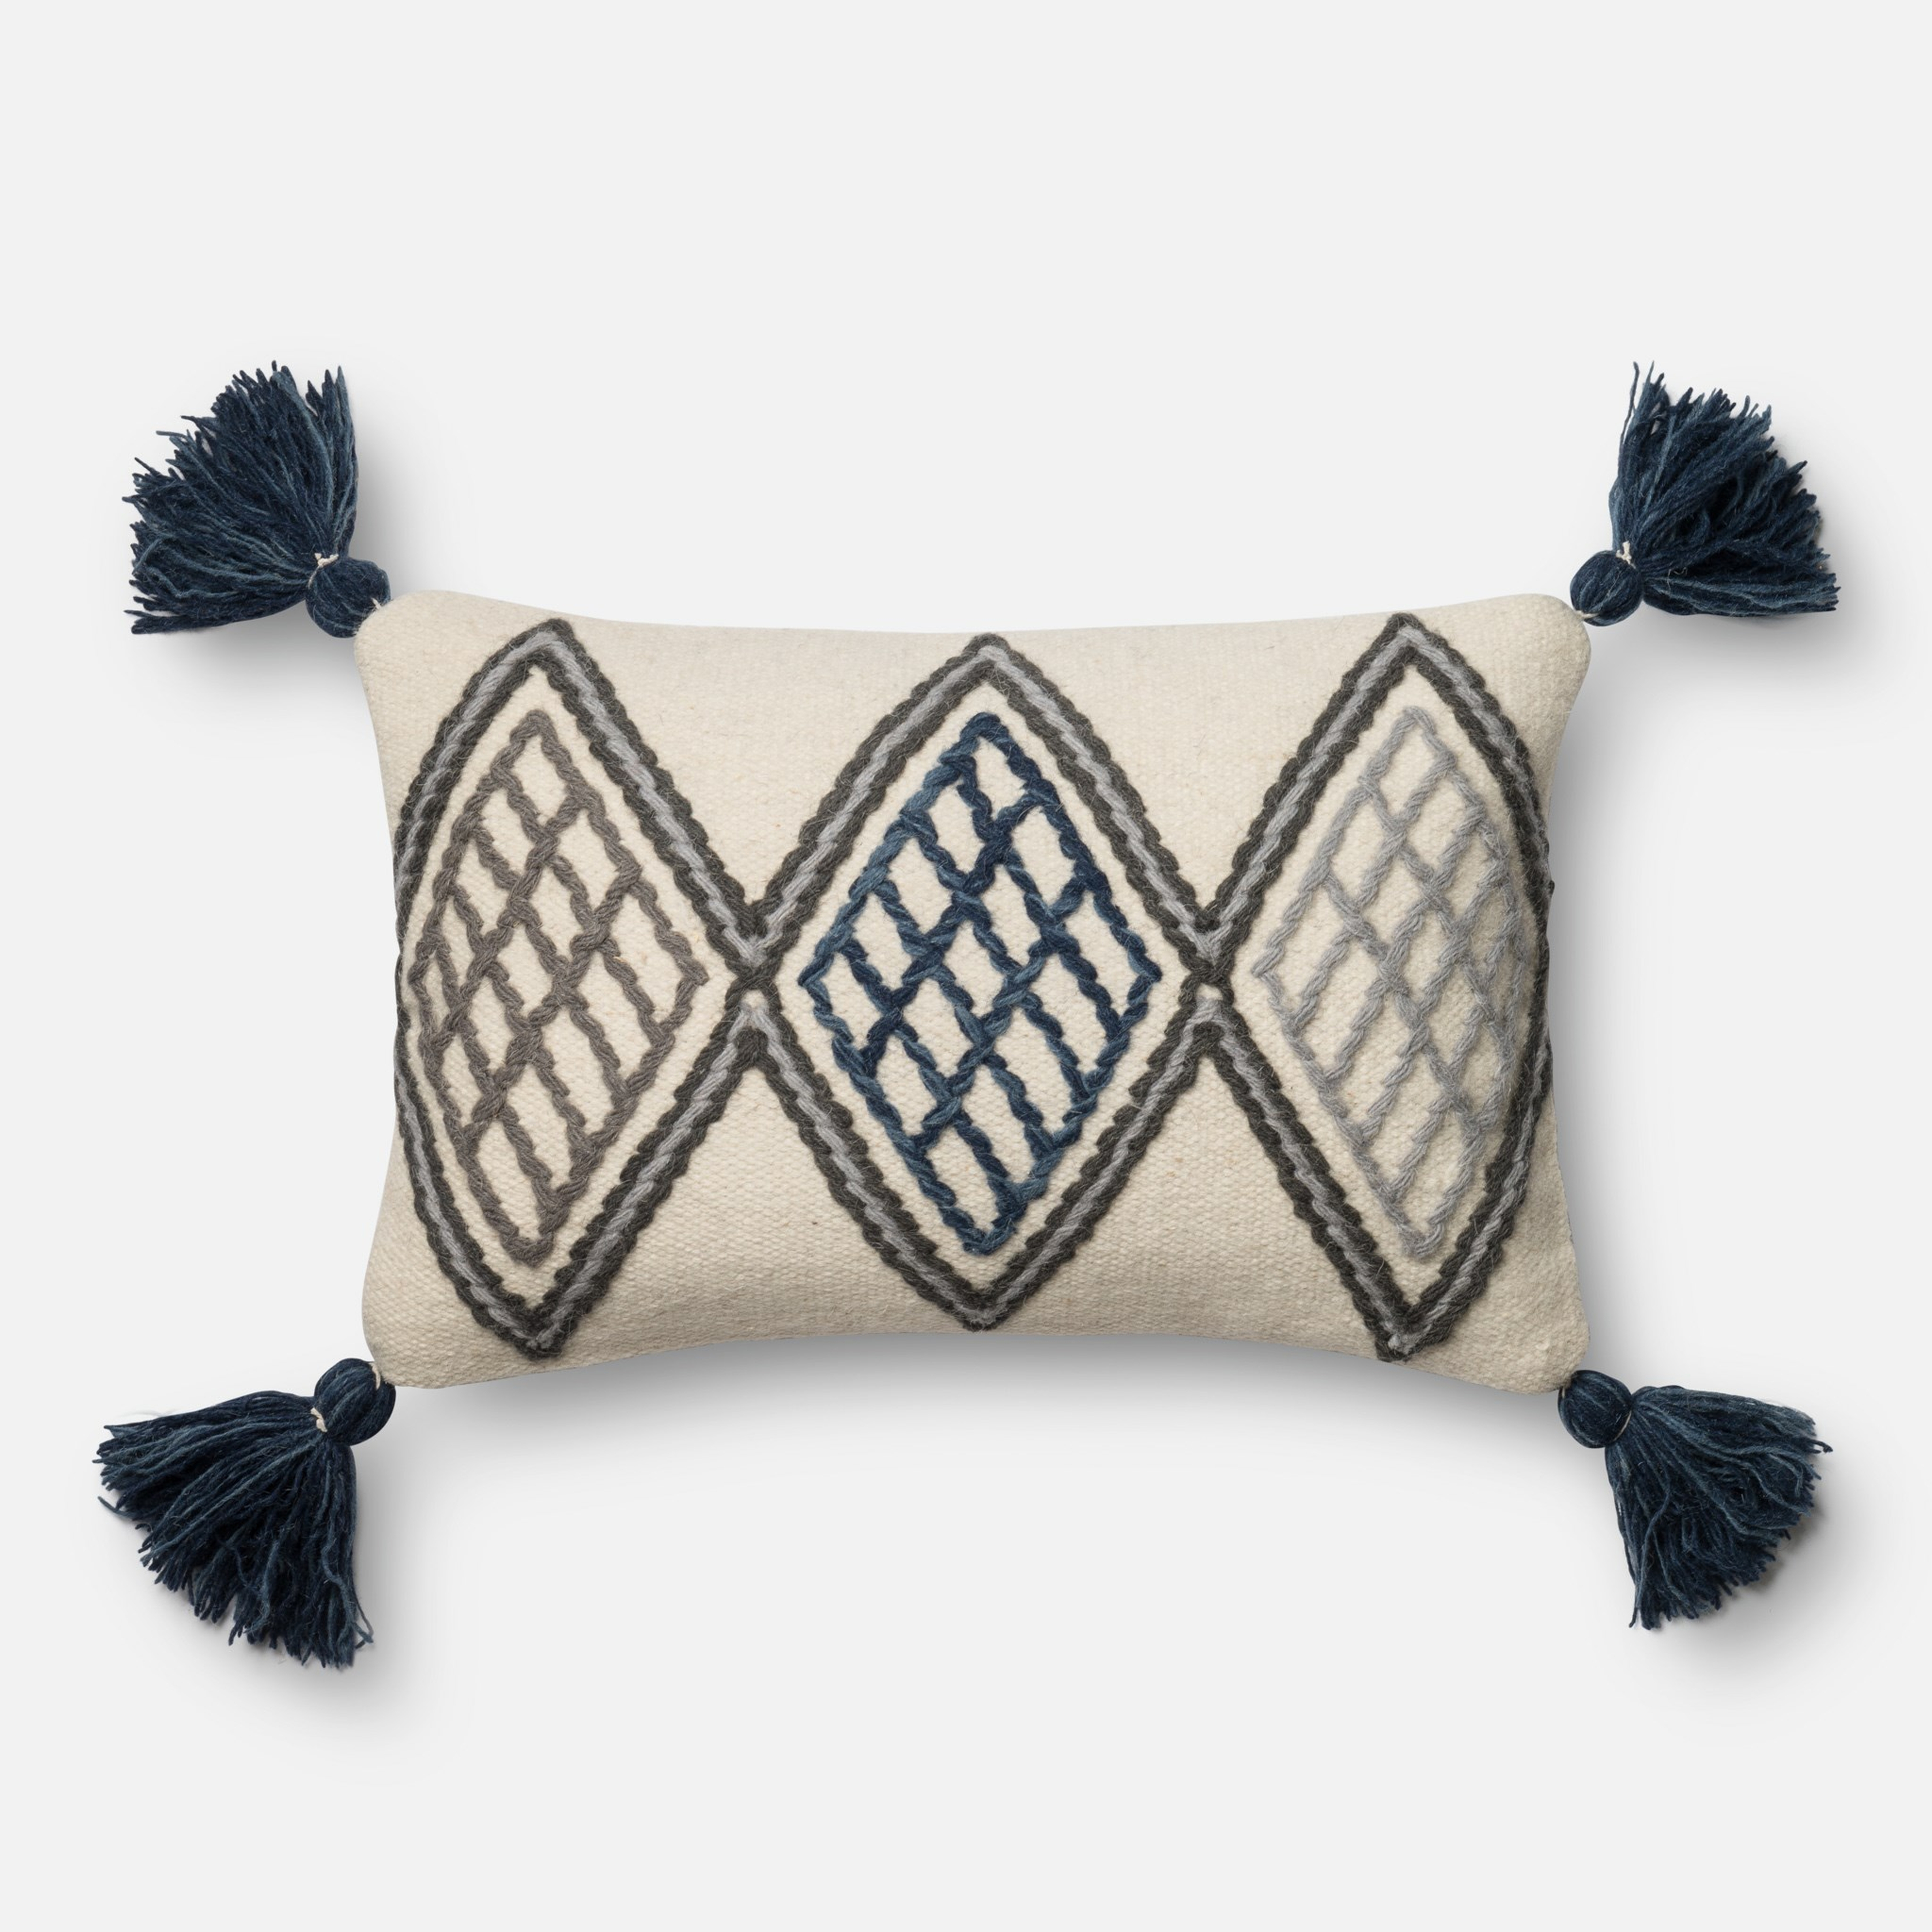 Criss-Cross Diamond Pillow, Blue & Ivory, 21" x 13" - Magnolia Home by Joana Gaines Crafted by Loloi Rugs